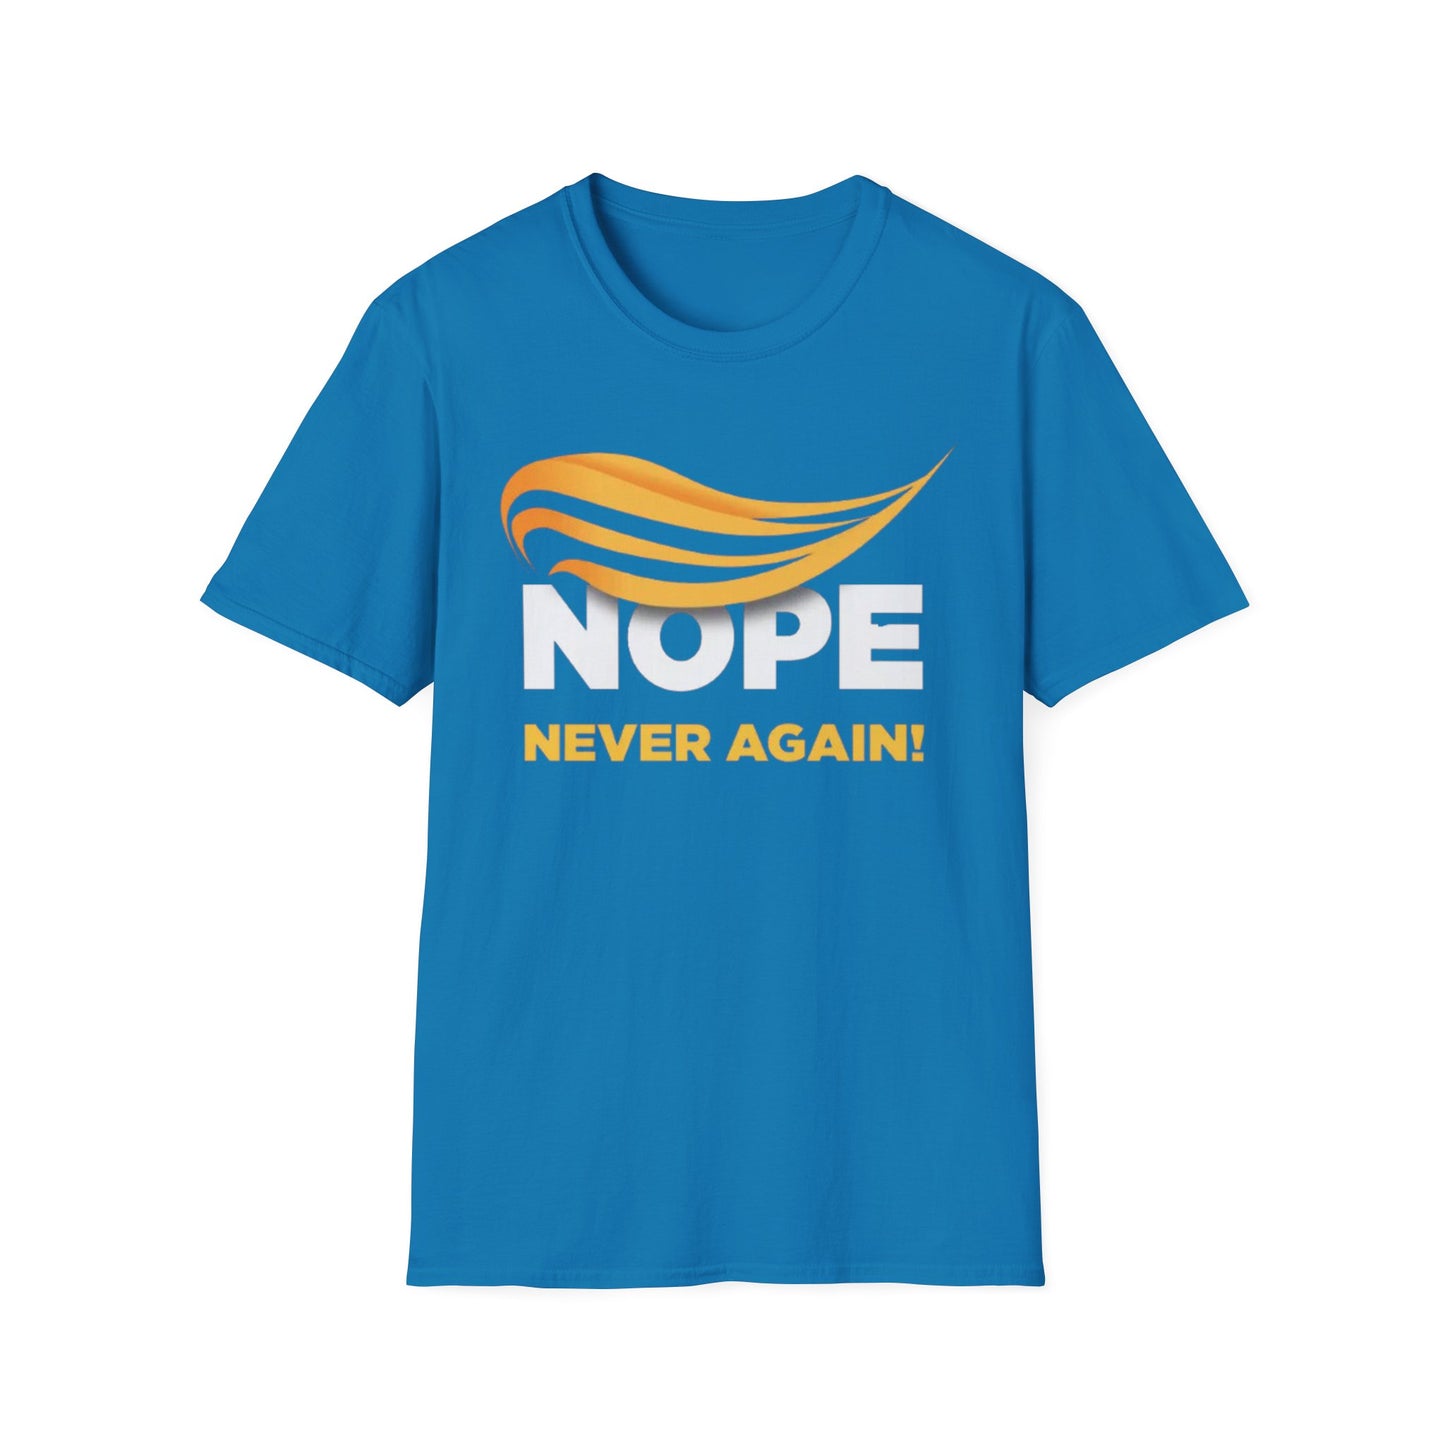 Nope Never Again - Unisex Softstyle T-Shirt